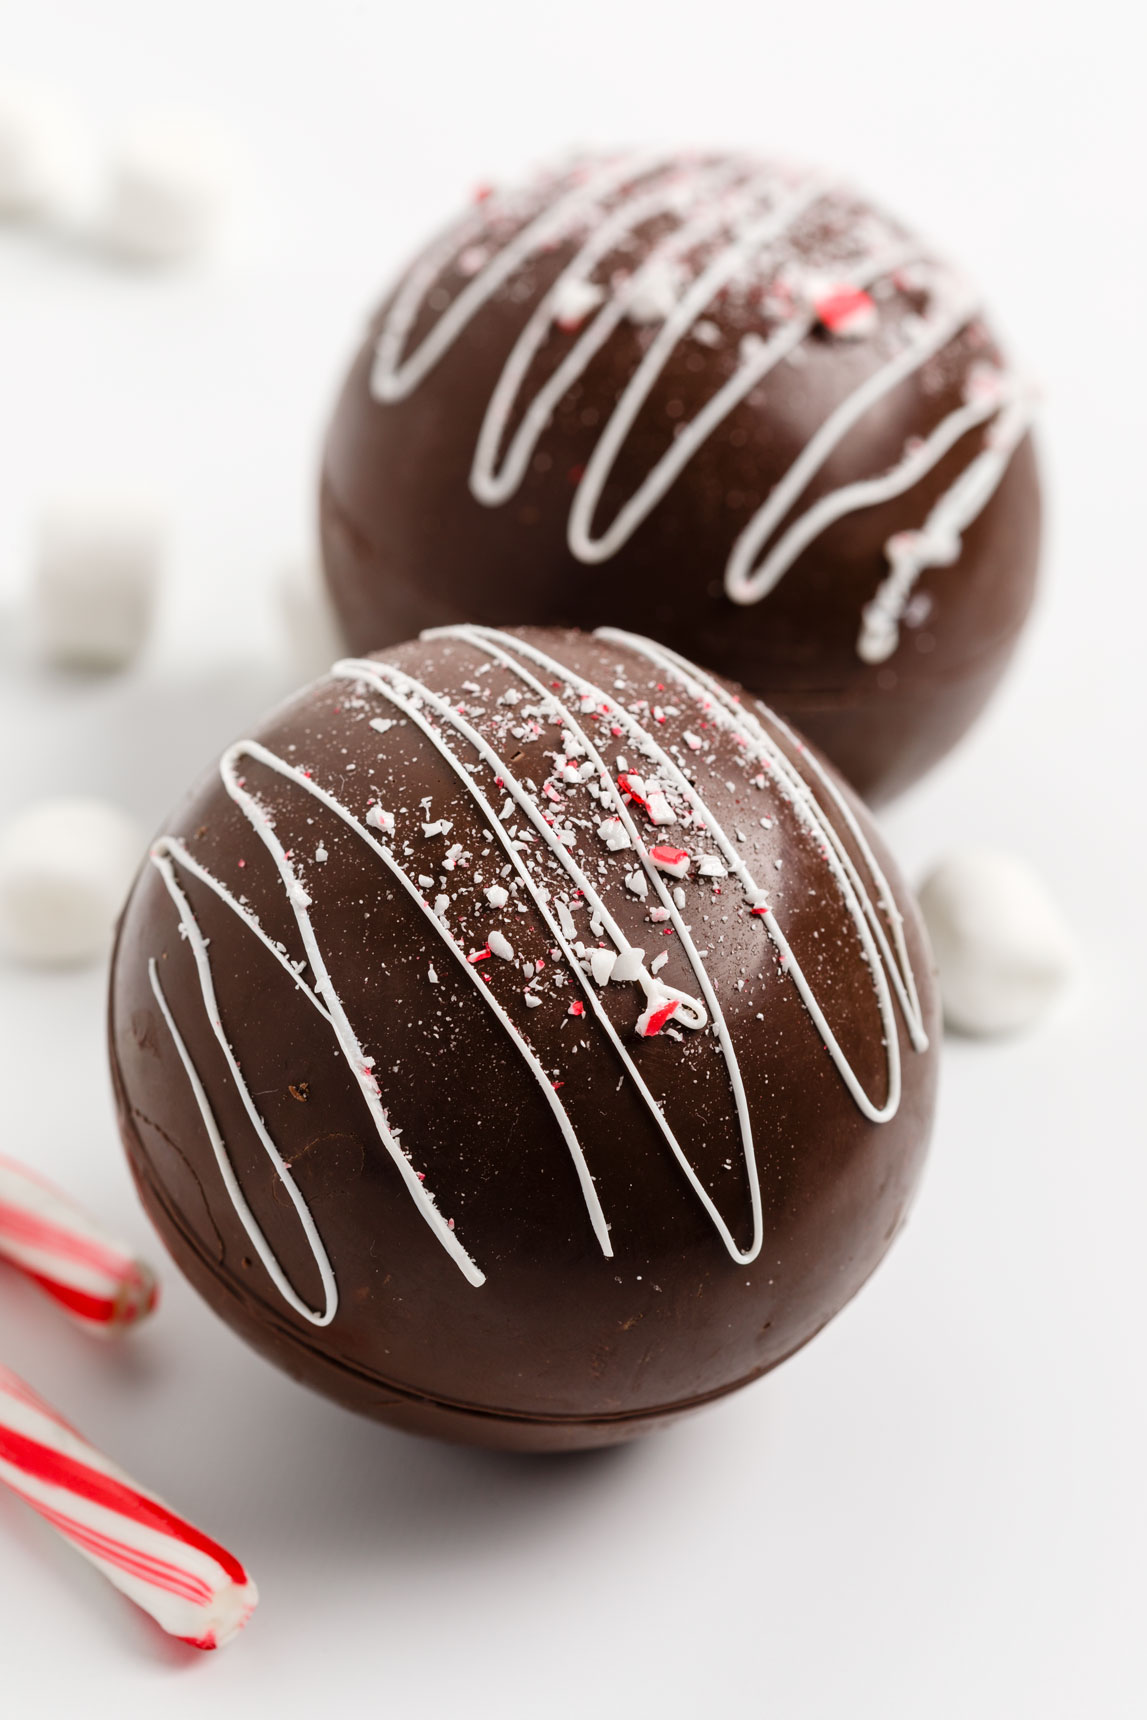 Luxury hot cocoa bombs with white chocolate drizzle over and sprinkled with crushed peppermint